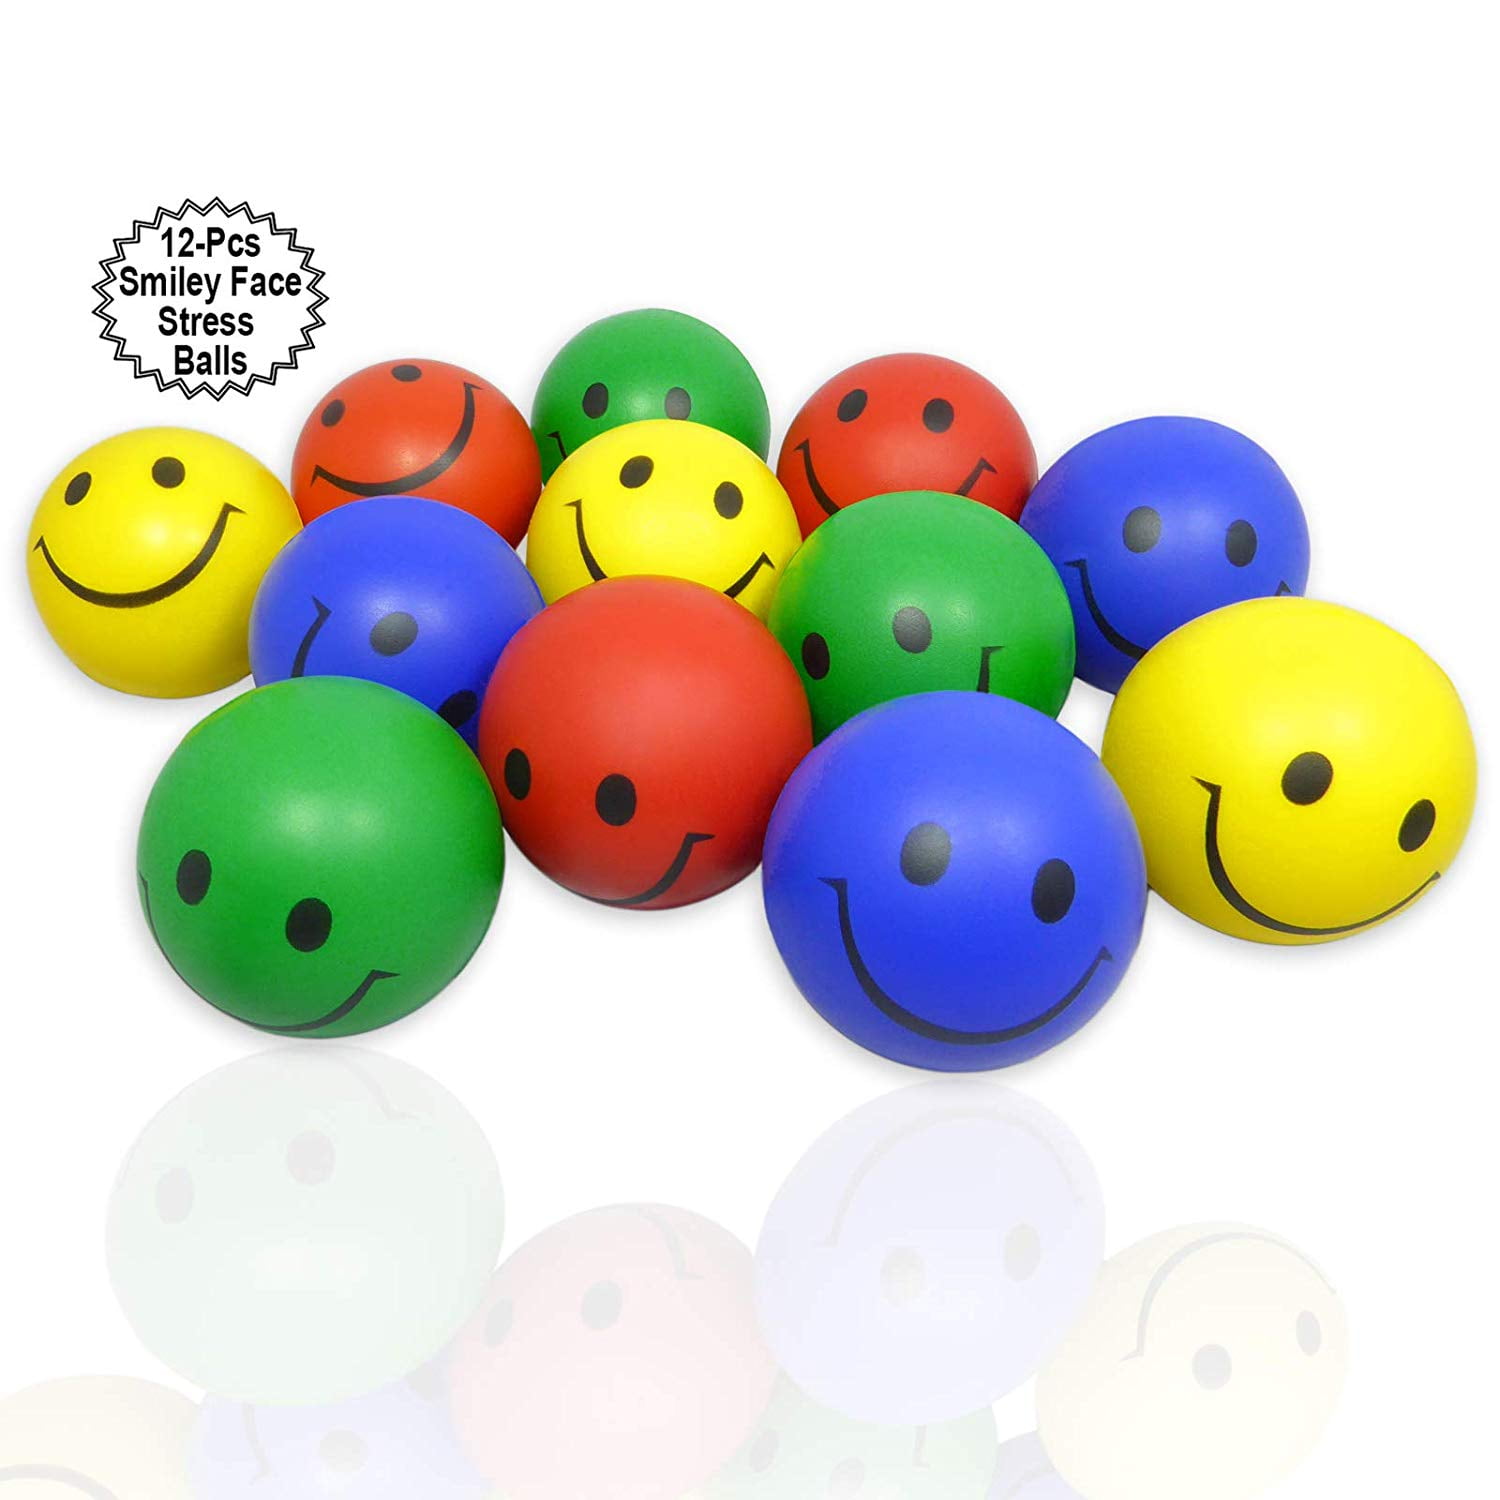 Sensory Autism ADHD or Fun Toy Emoji Squeezable Stress Relief Balls 